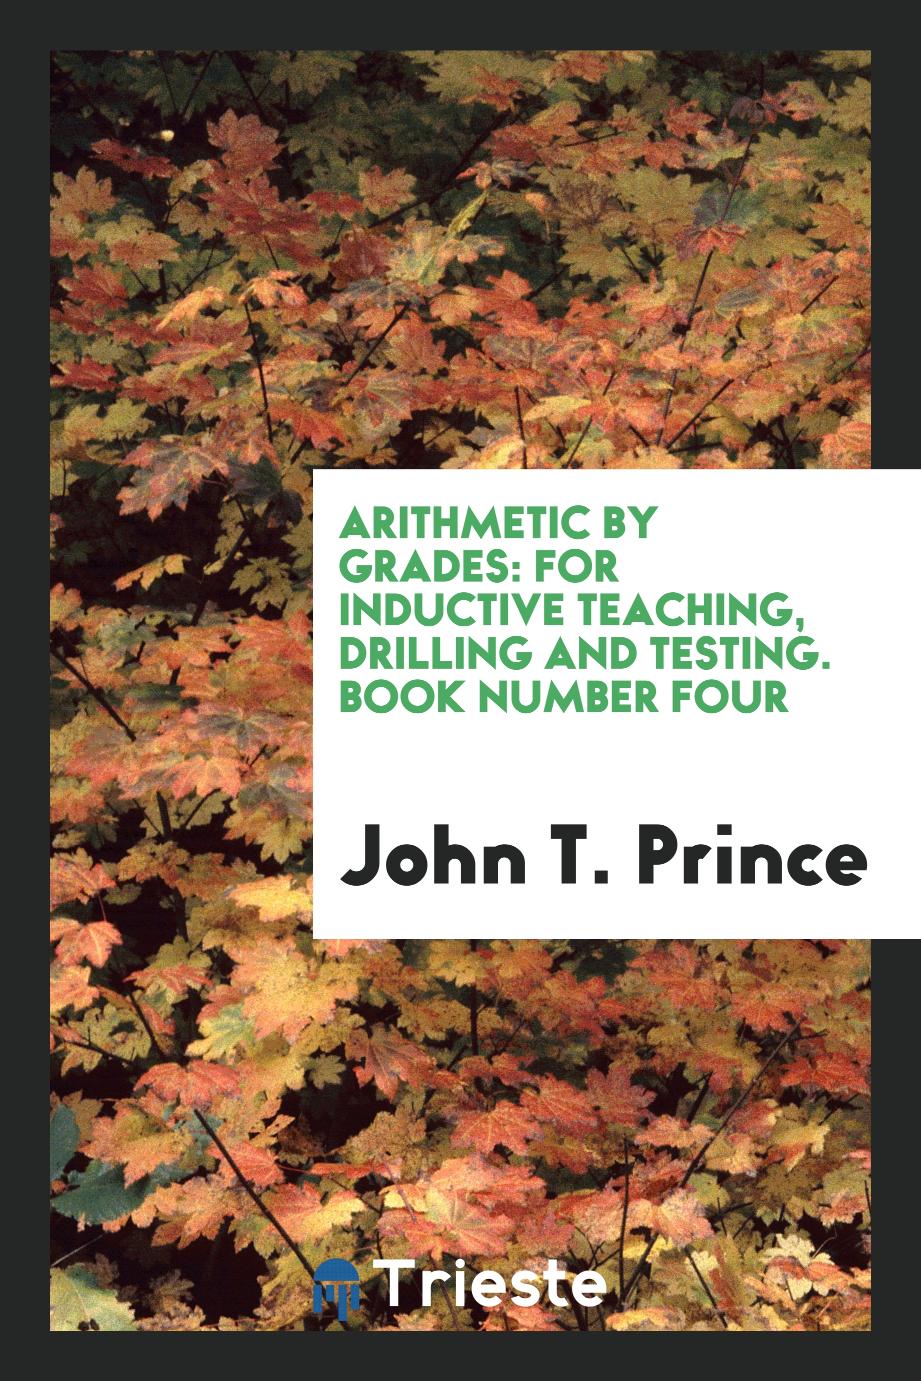 Arithmetic by Grades: For Inductive Teaching, Drilling and Testing. Book Number Four